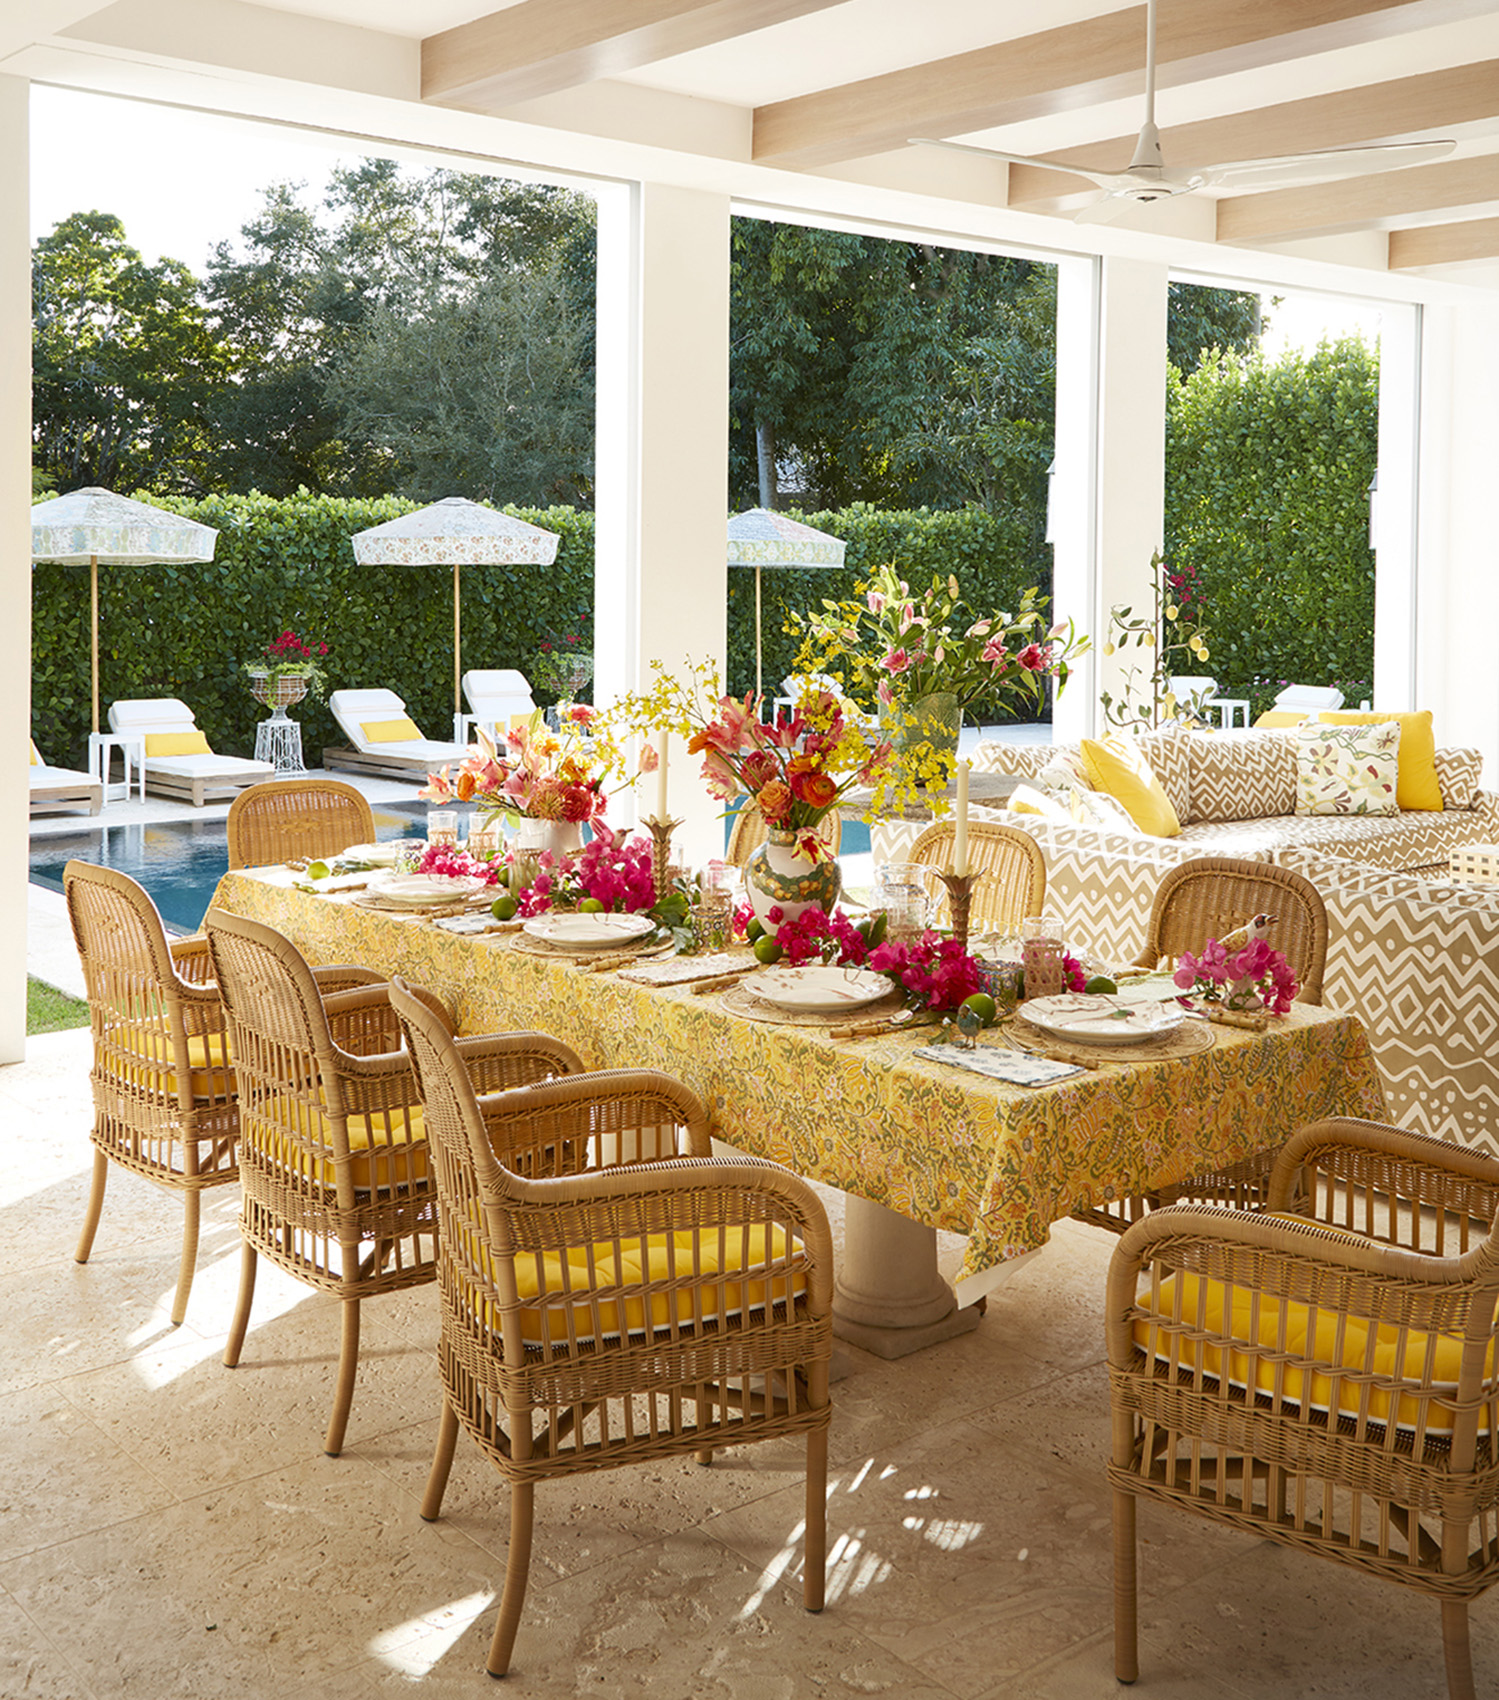 Lanai designed by Summer Thornton in this tropical house located in Old Naples, FL.